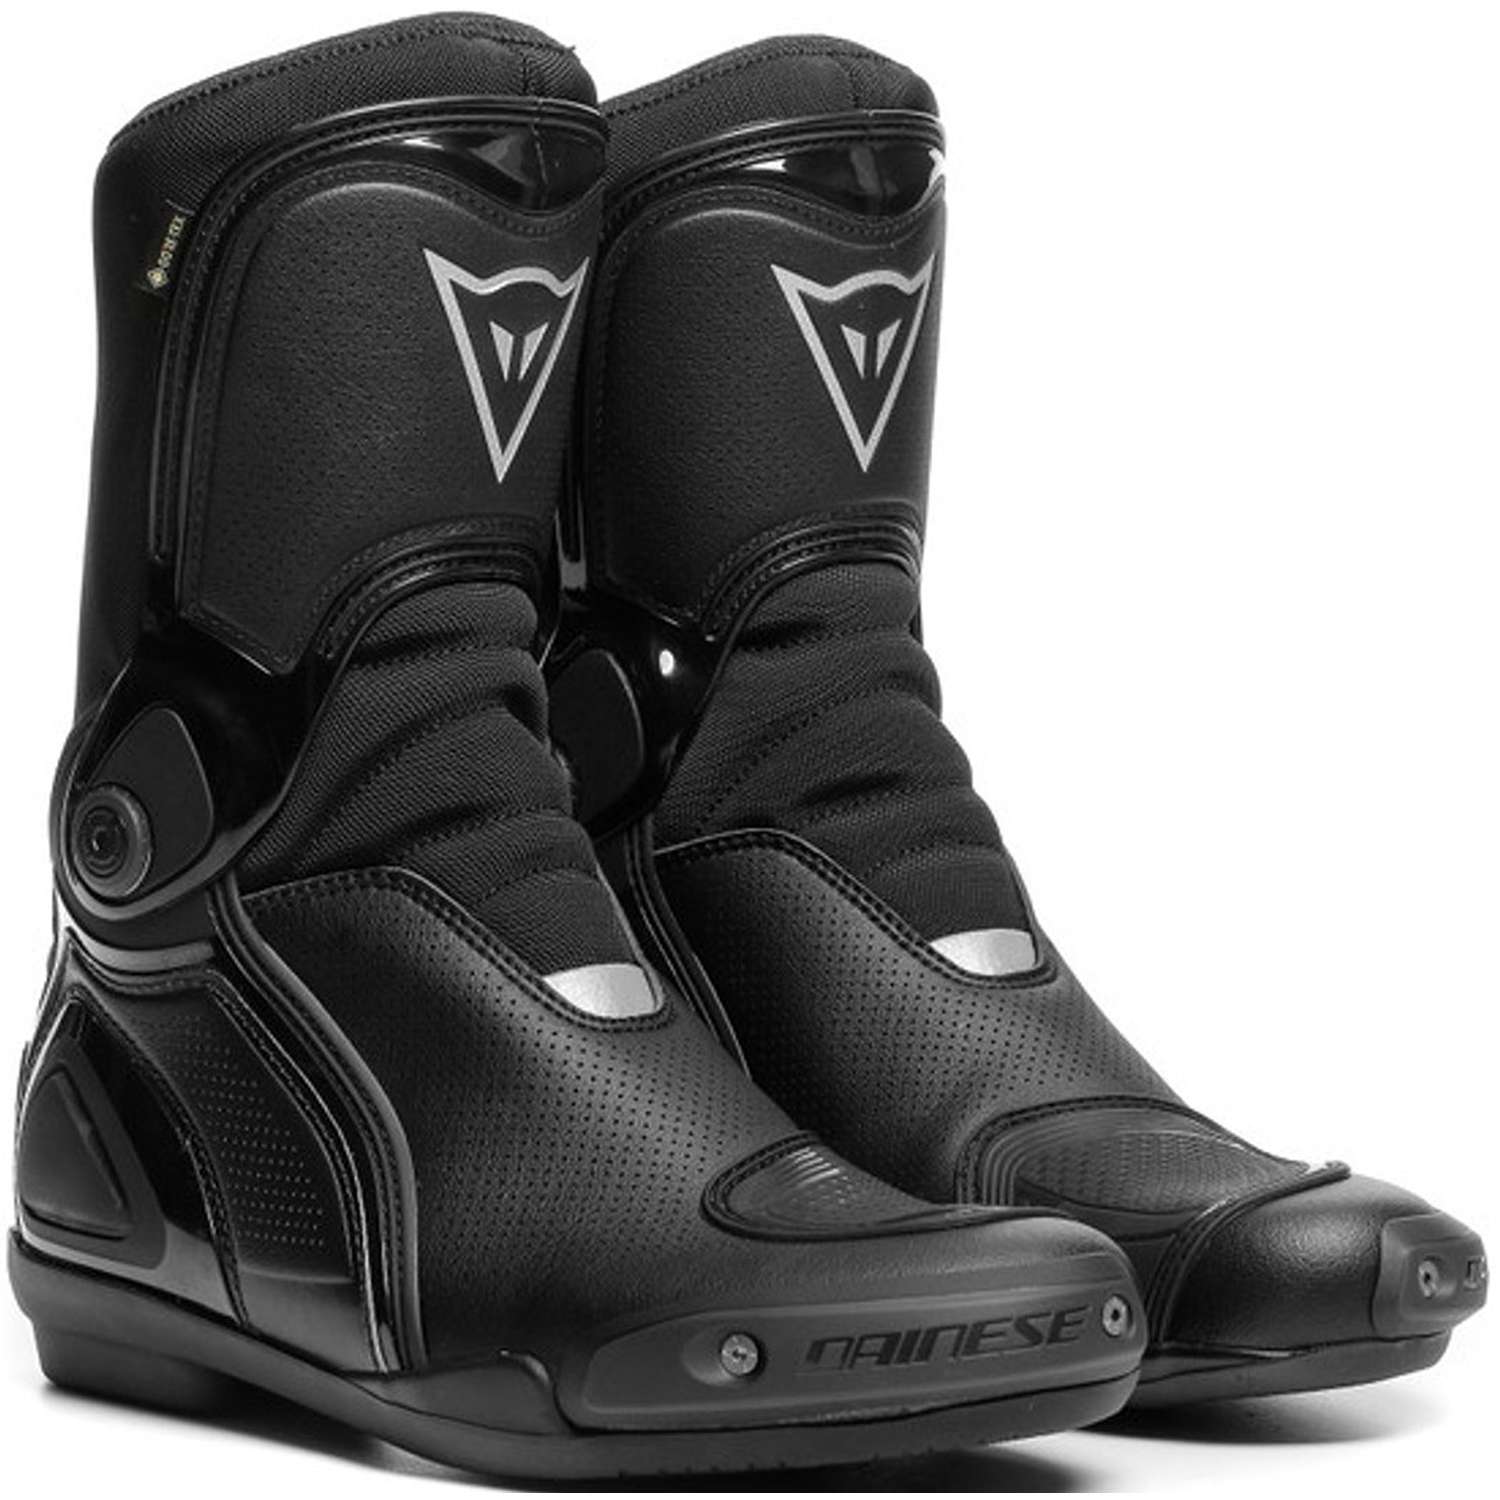 Image of Dainese Sport Master Gore-Tex Boots Black Size 43 EN